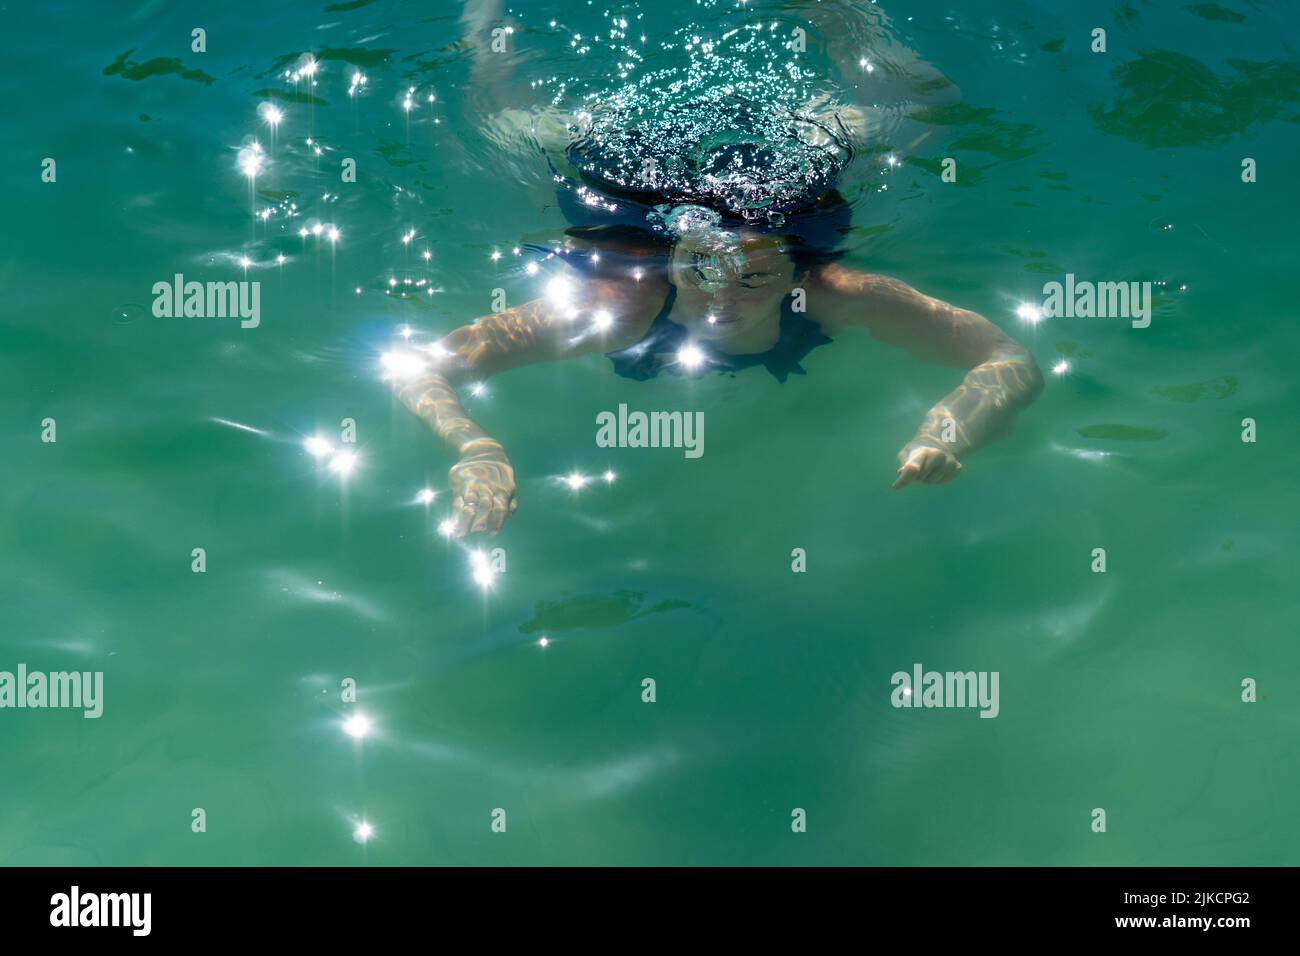 young girl diving in a lake coming out of the water Stock Photo